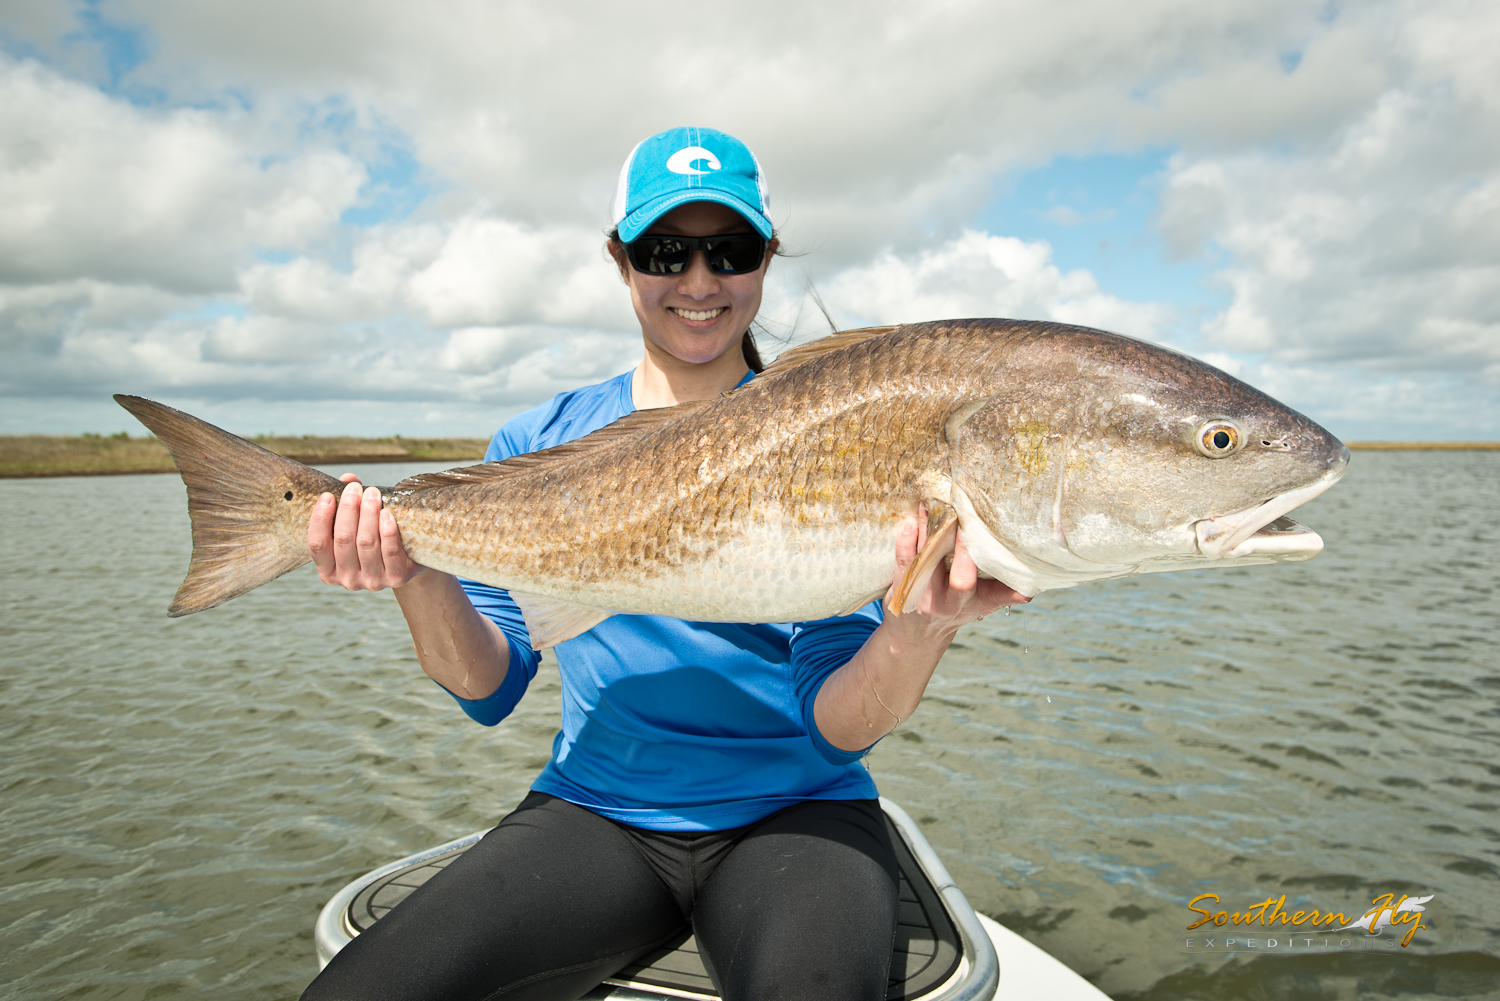 Fly fishing louisiana with Southern Fly Expeditions  fishing new orleans 